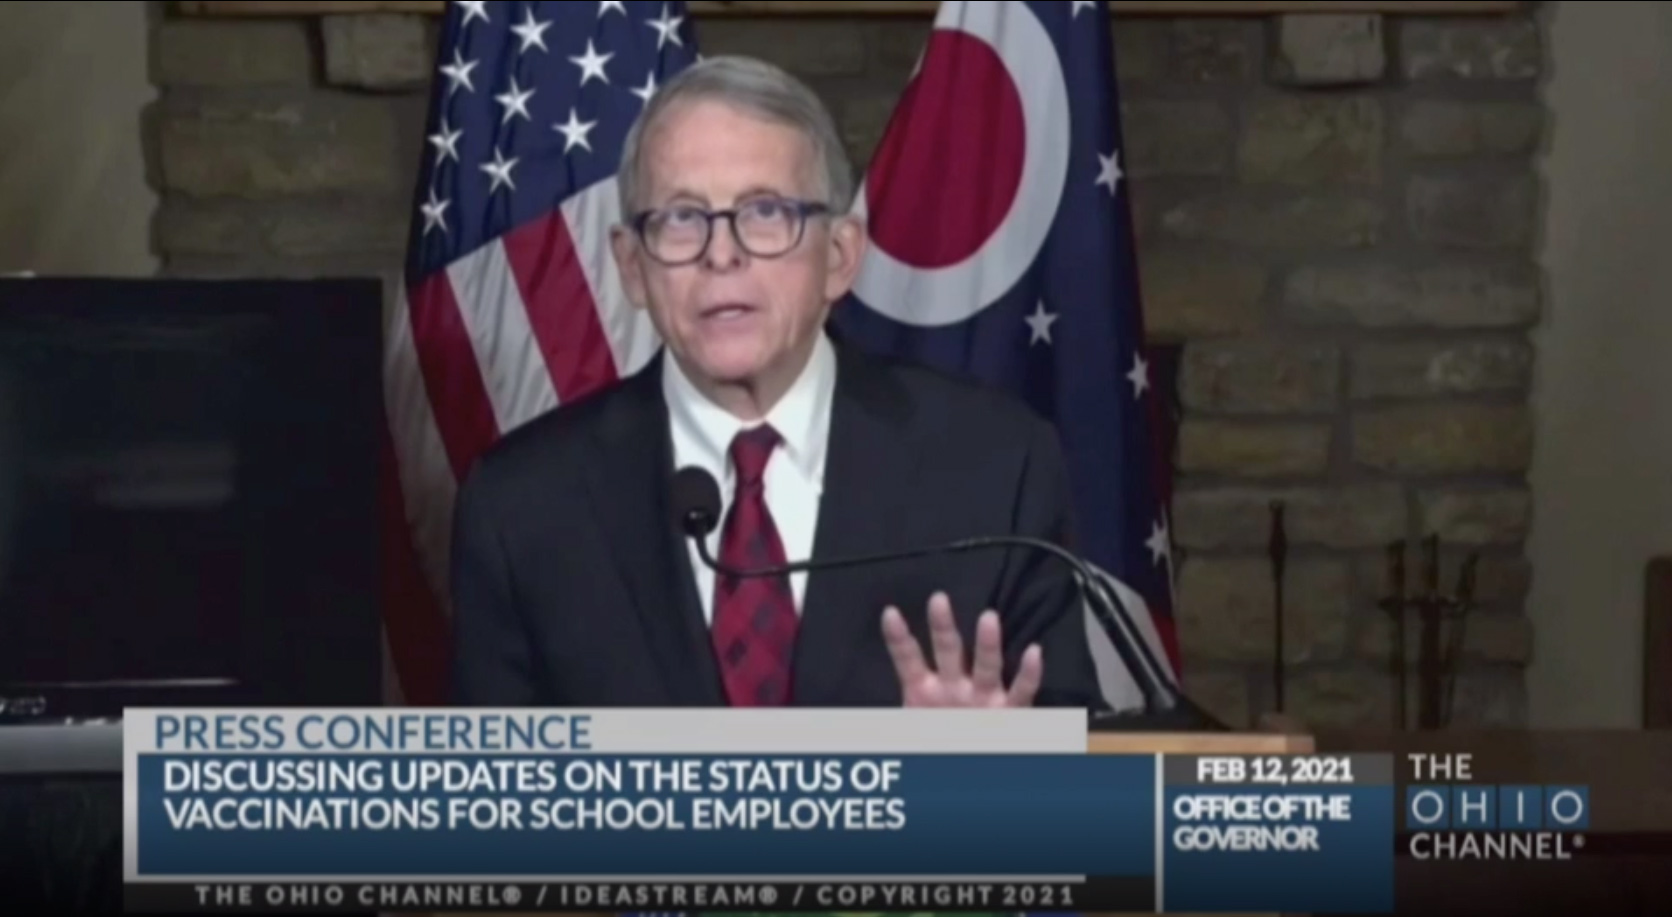 Ohio Governor Mike DeWine speaks during a press conference in Columbus, Ohio, on February 12.